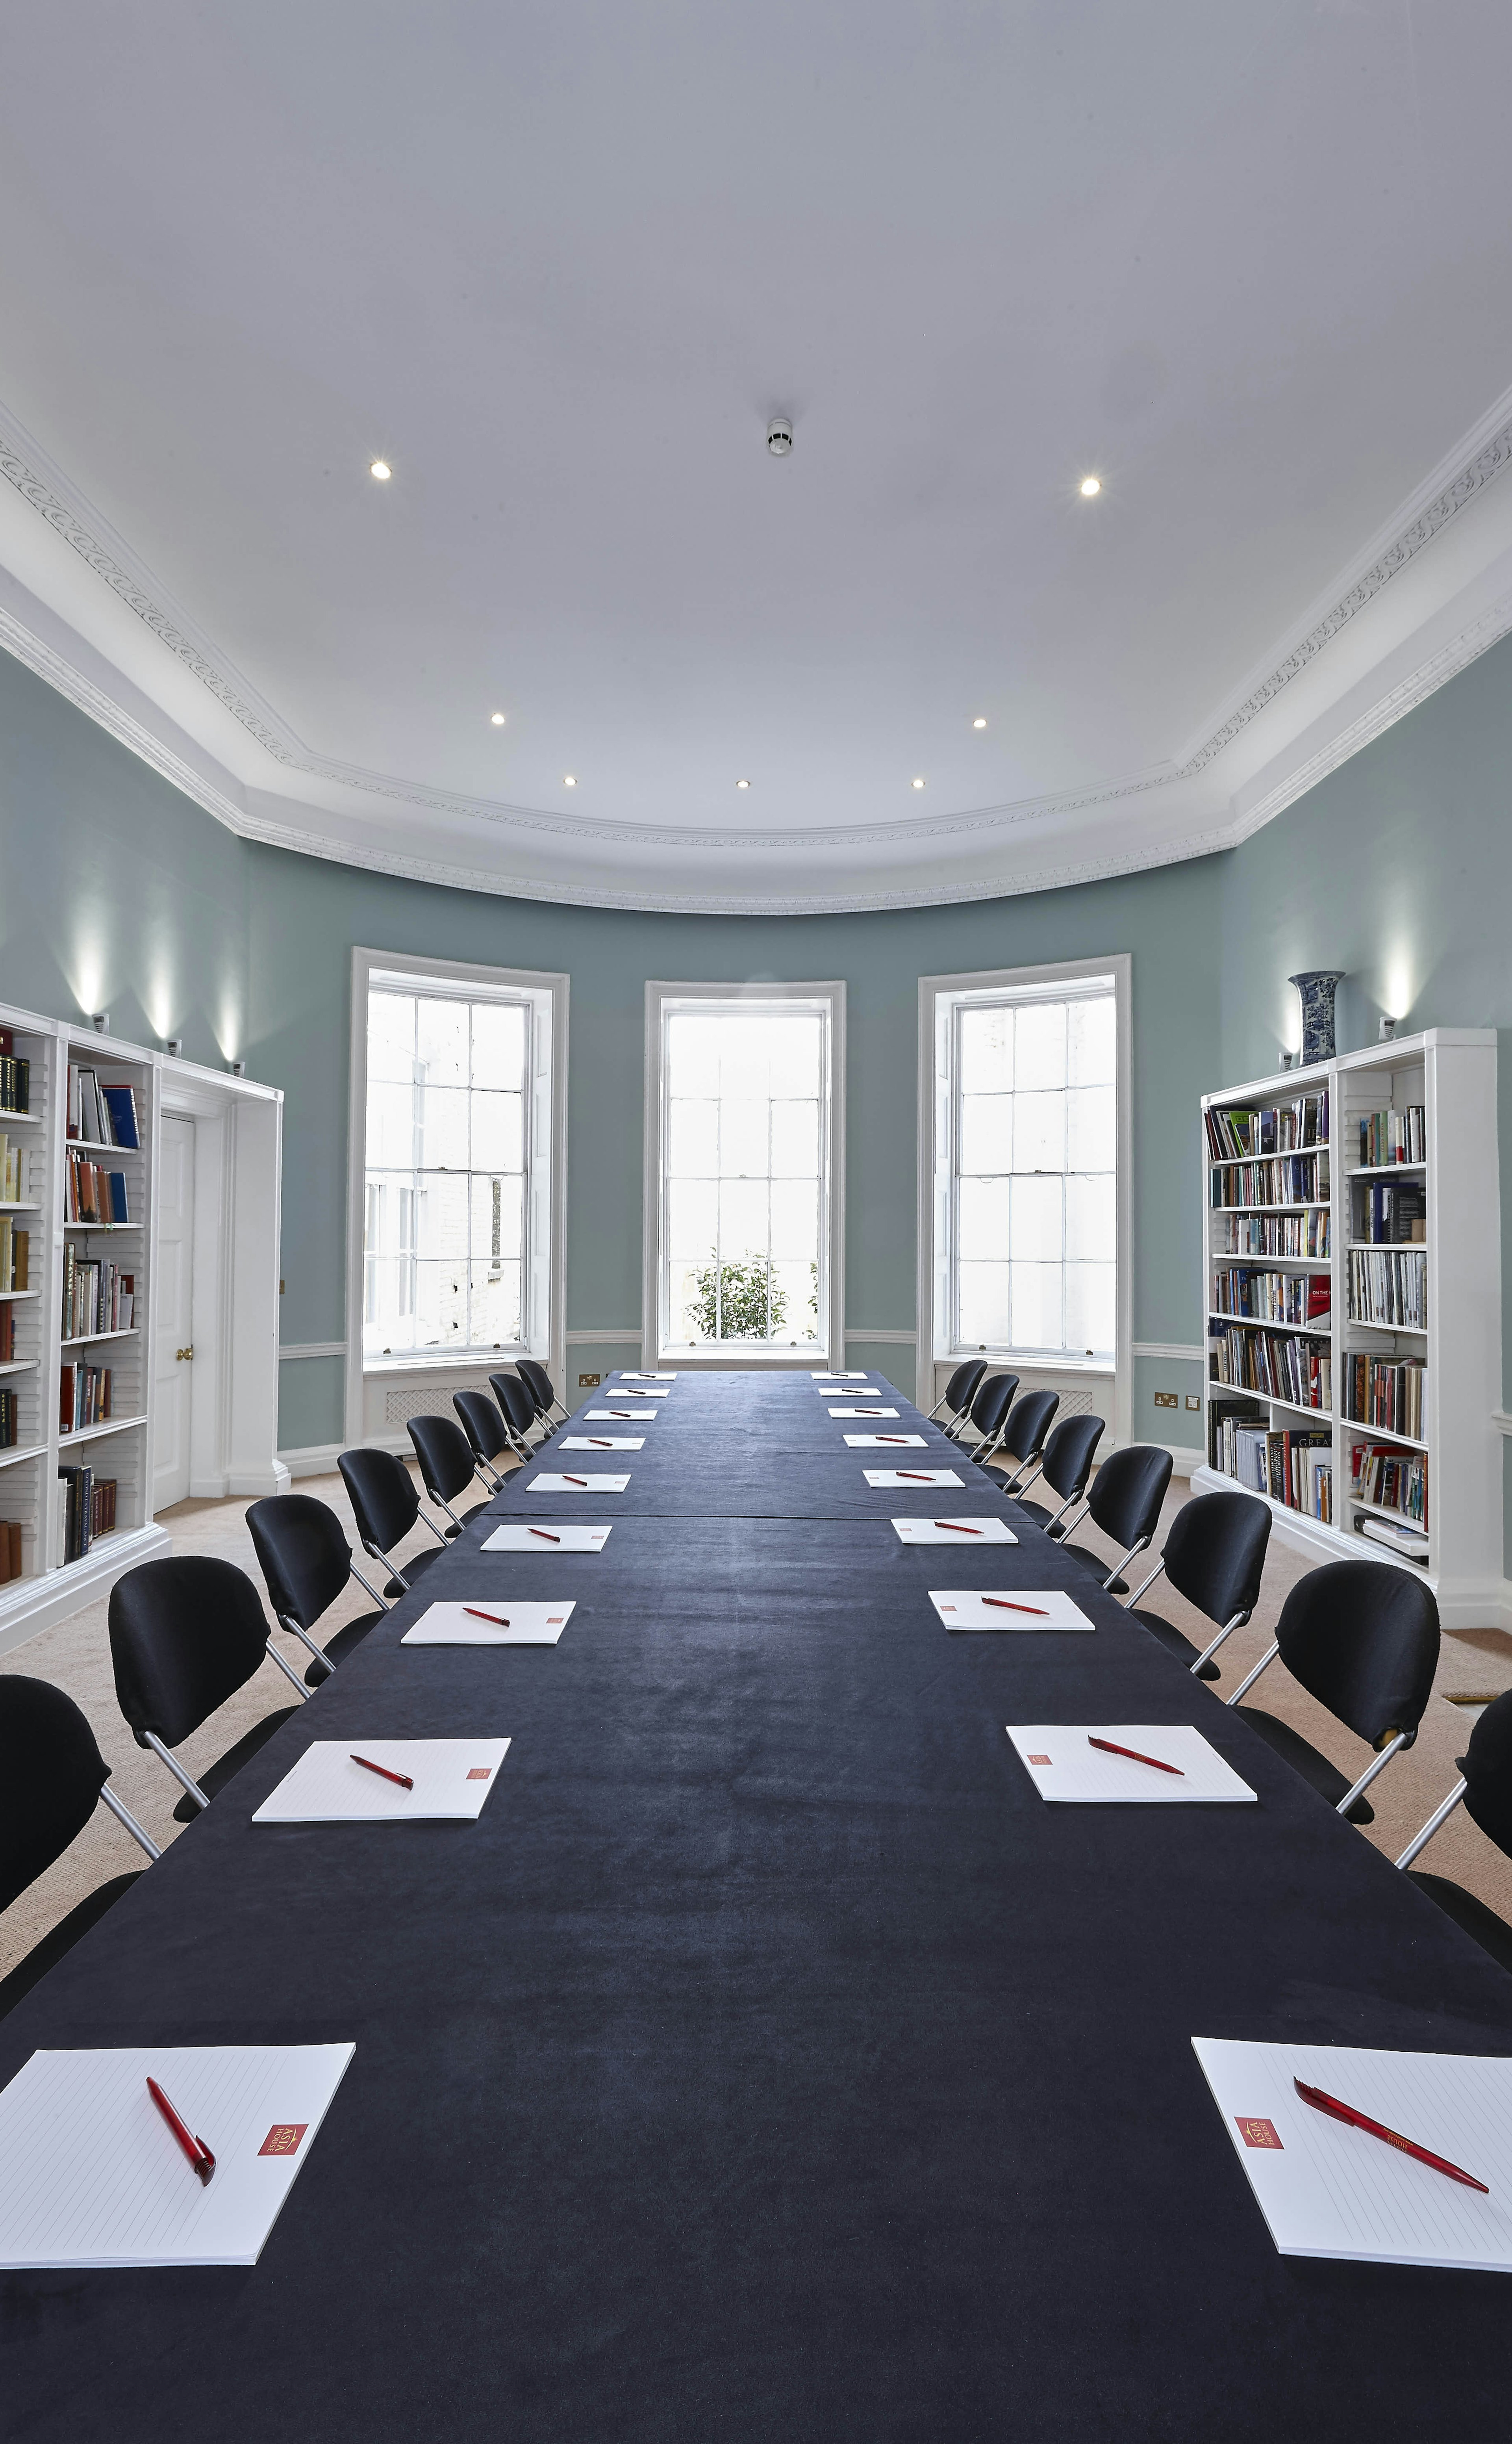 Trending Meeting Rooms - Asia House